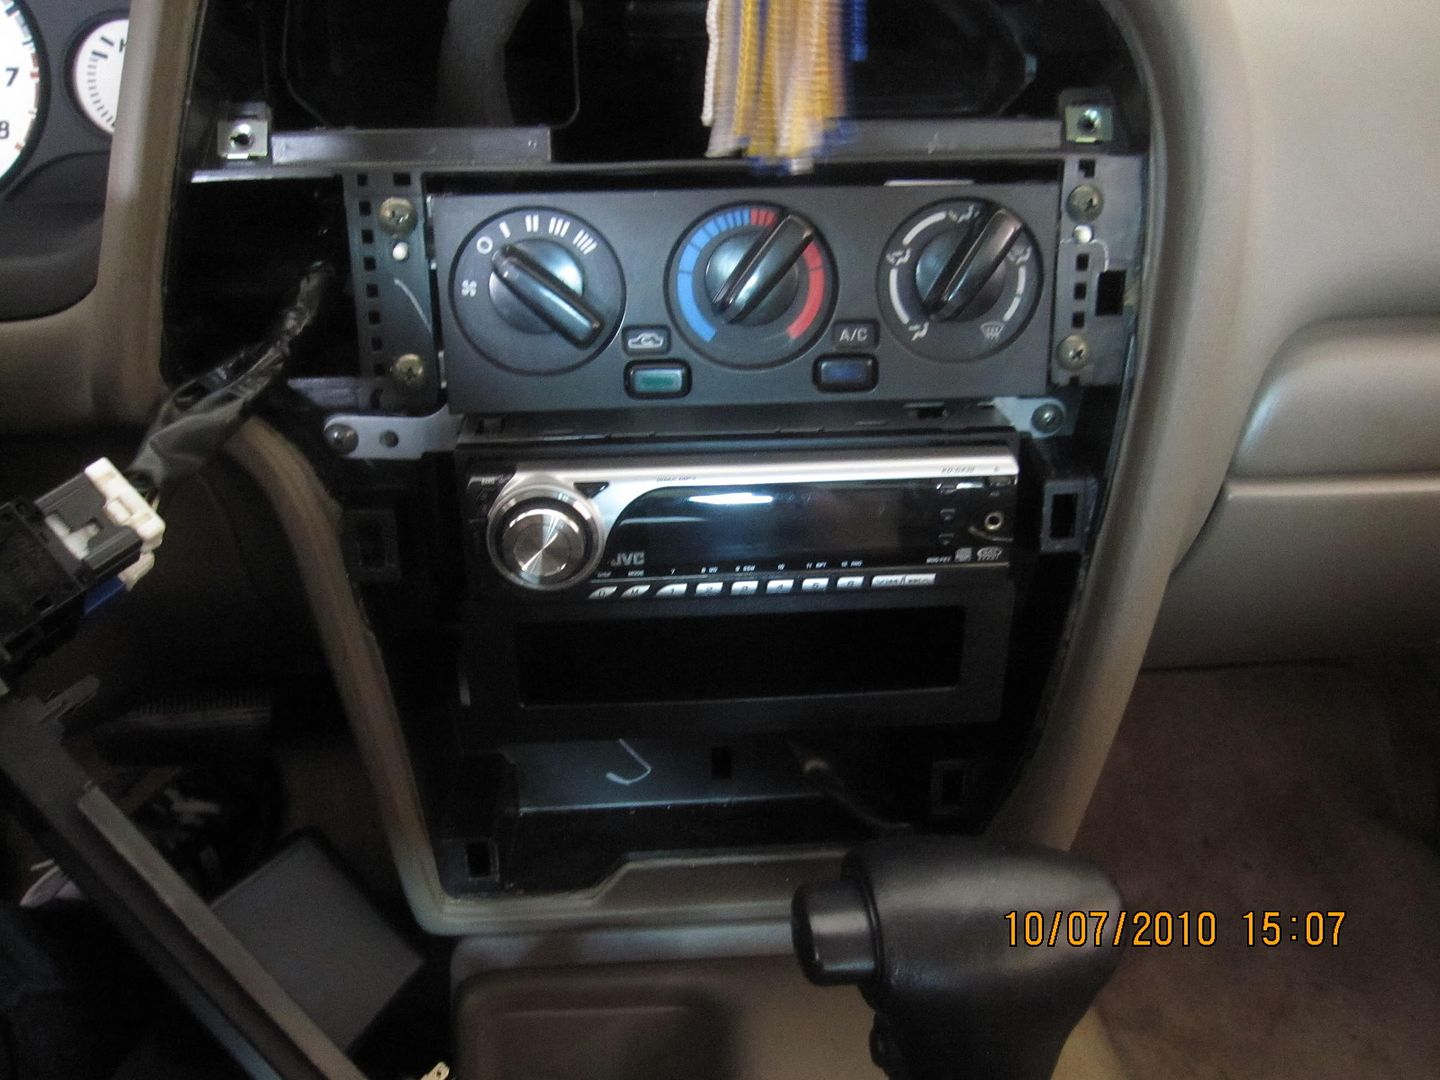 2001 Nissan pathfinder stereo removal